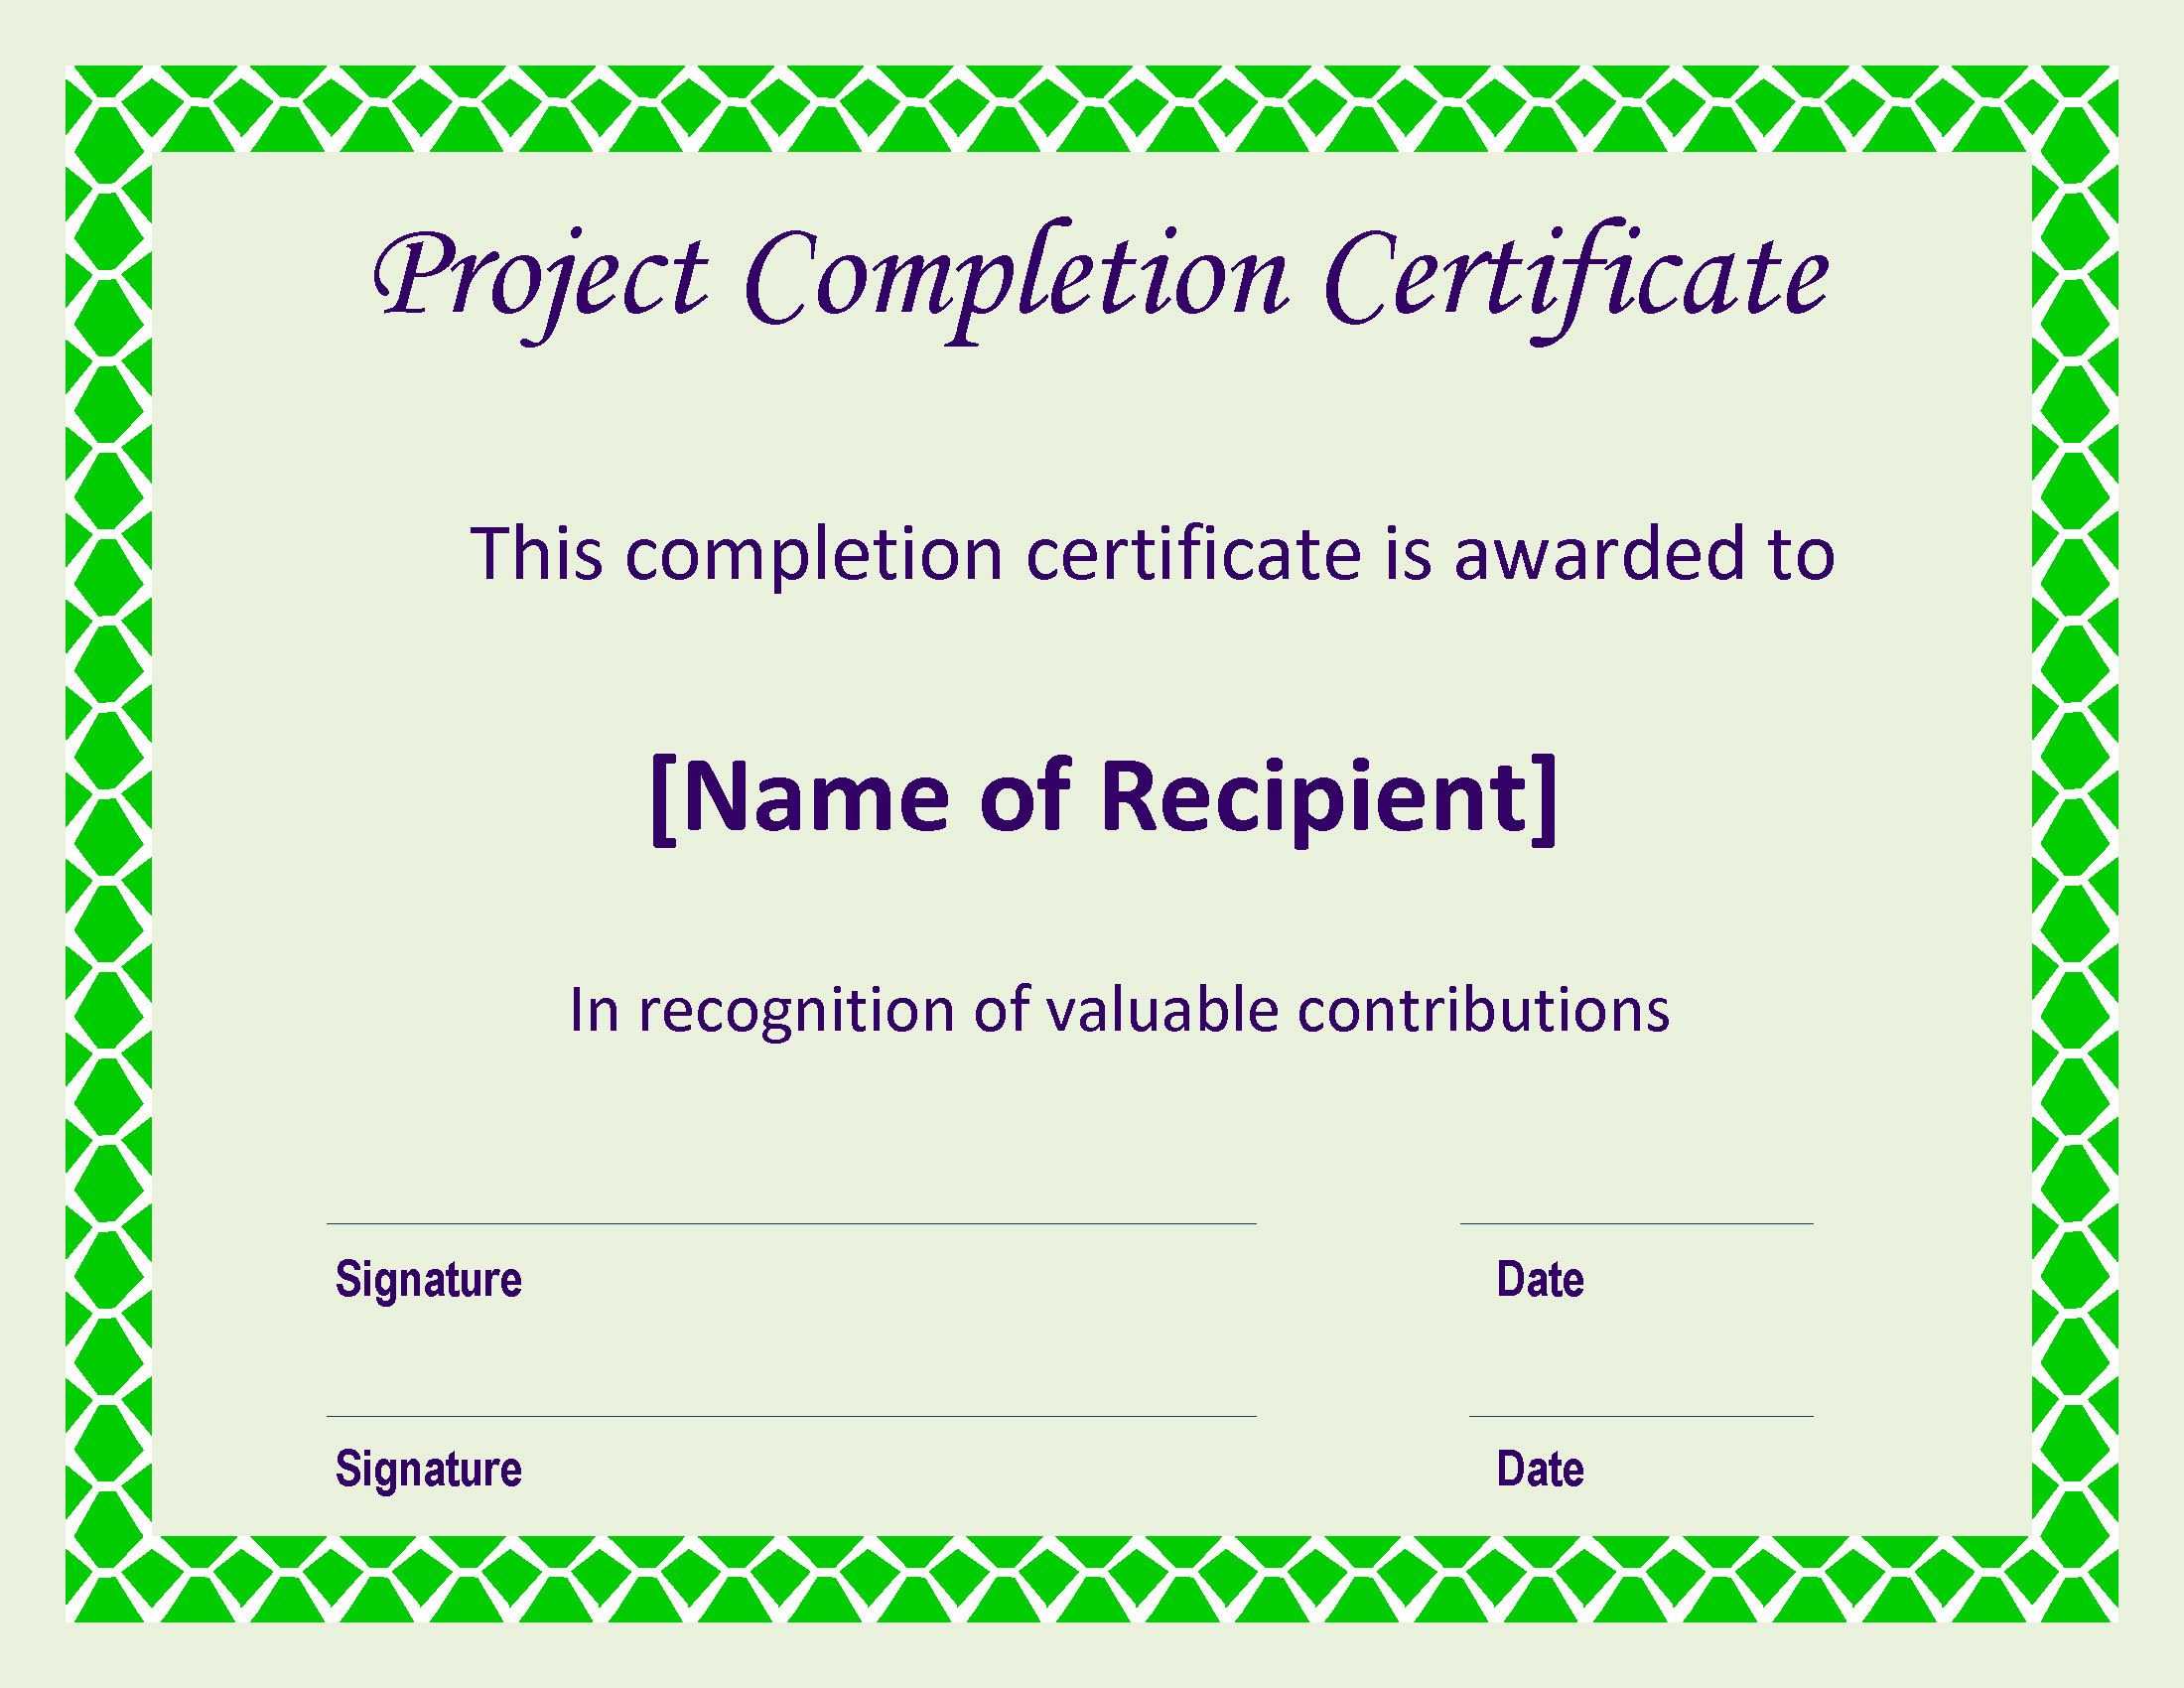 Certificate Of Completion Project | Templates At Within Certificate Template For Project Completion